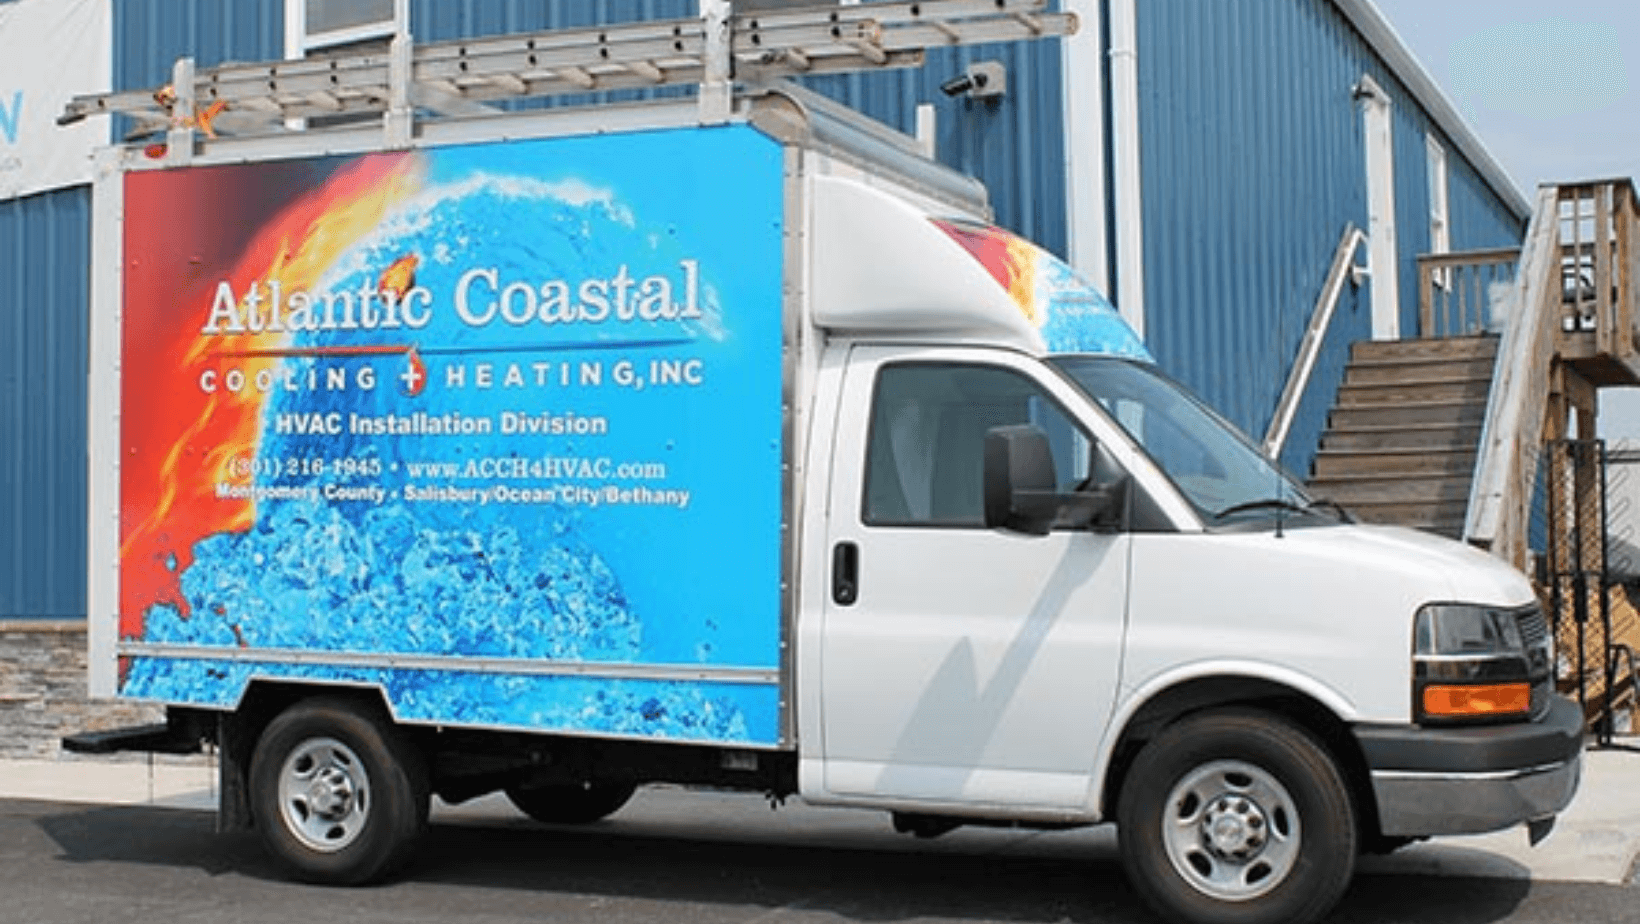 box-truck-with tie-dye-wave-picture